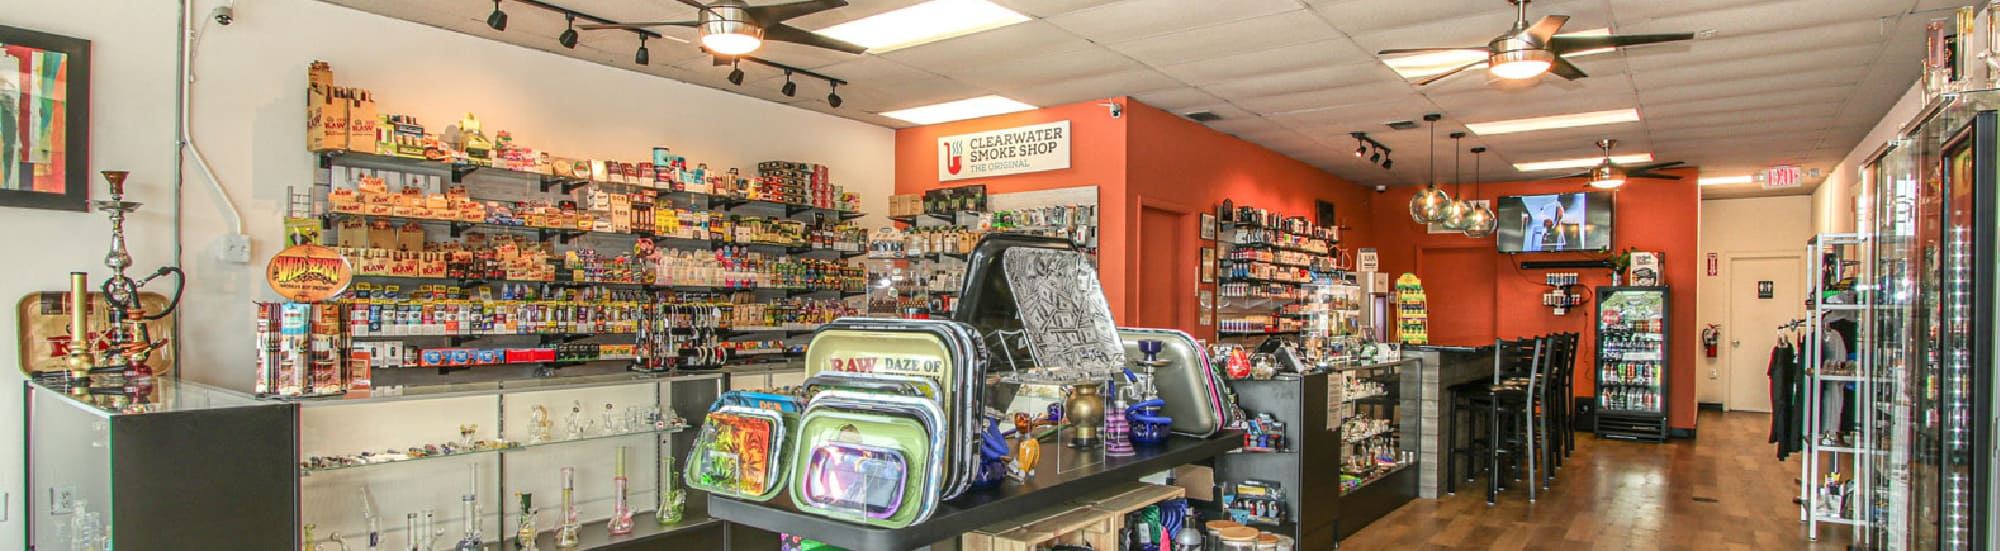 image of clearwater smoke shop